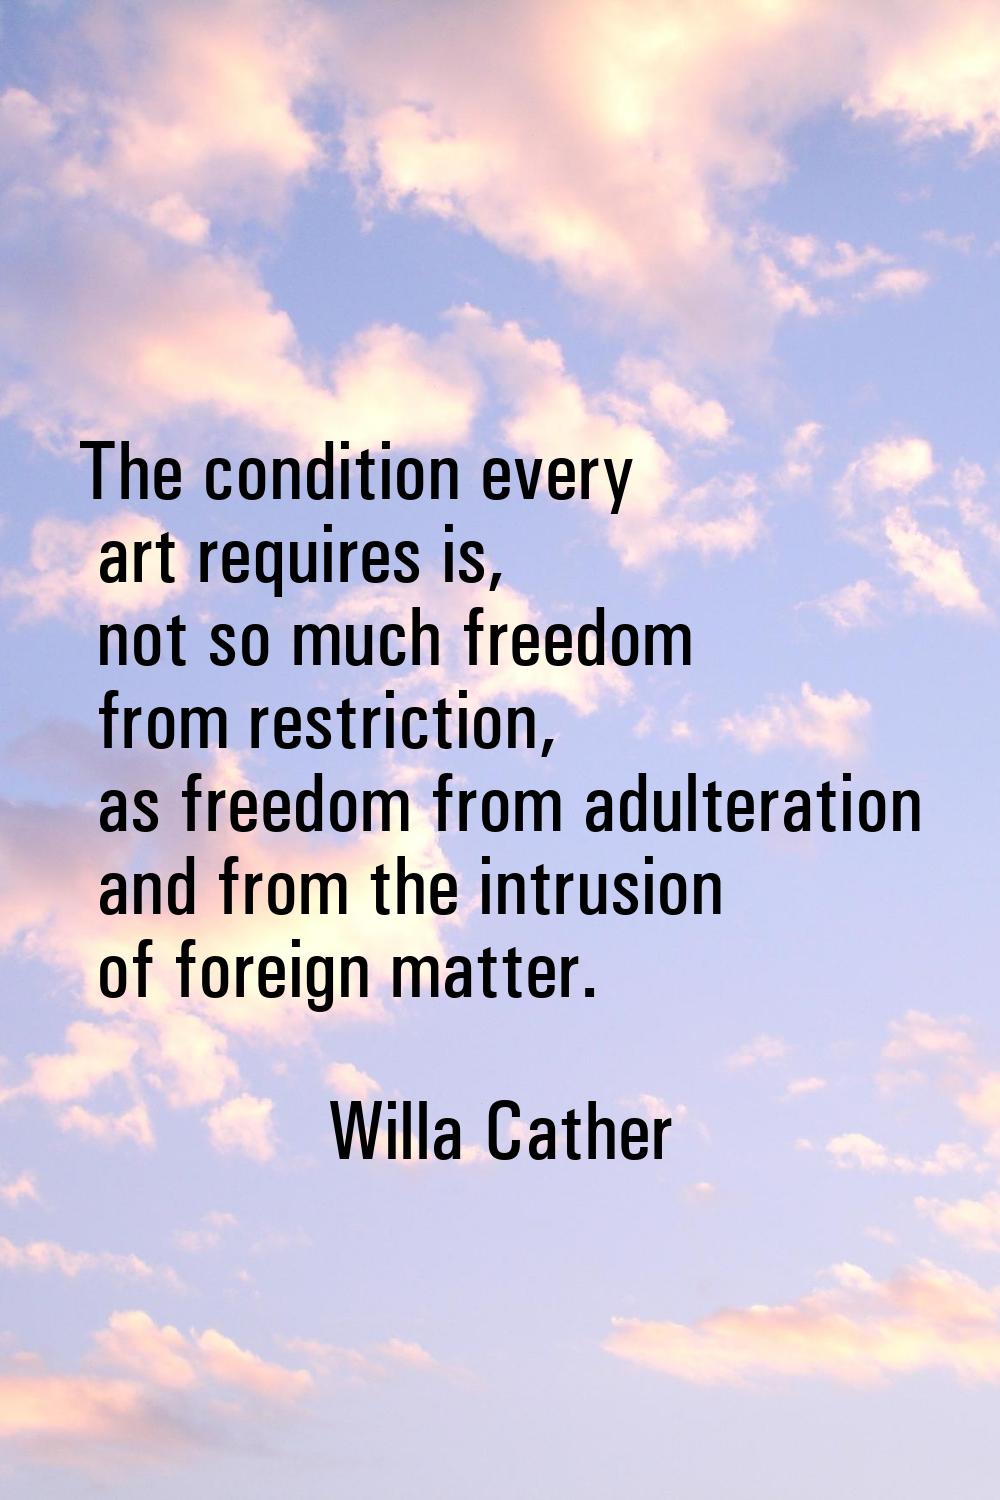 The condition every art requires is, not so much freedom from restriction, as freedom from adultera